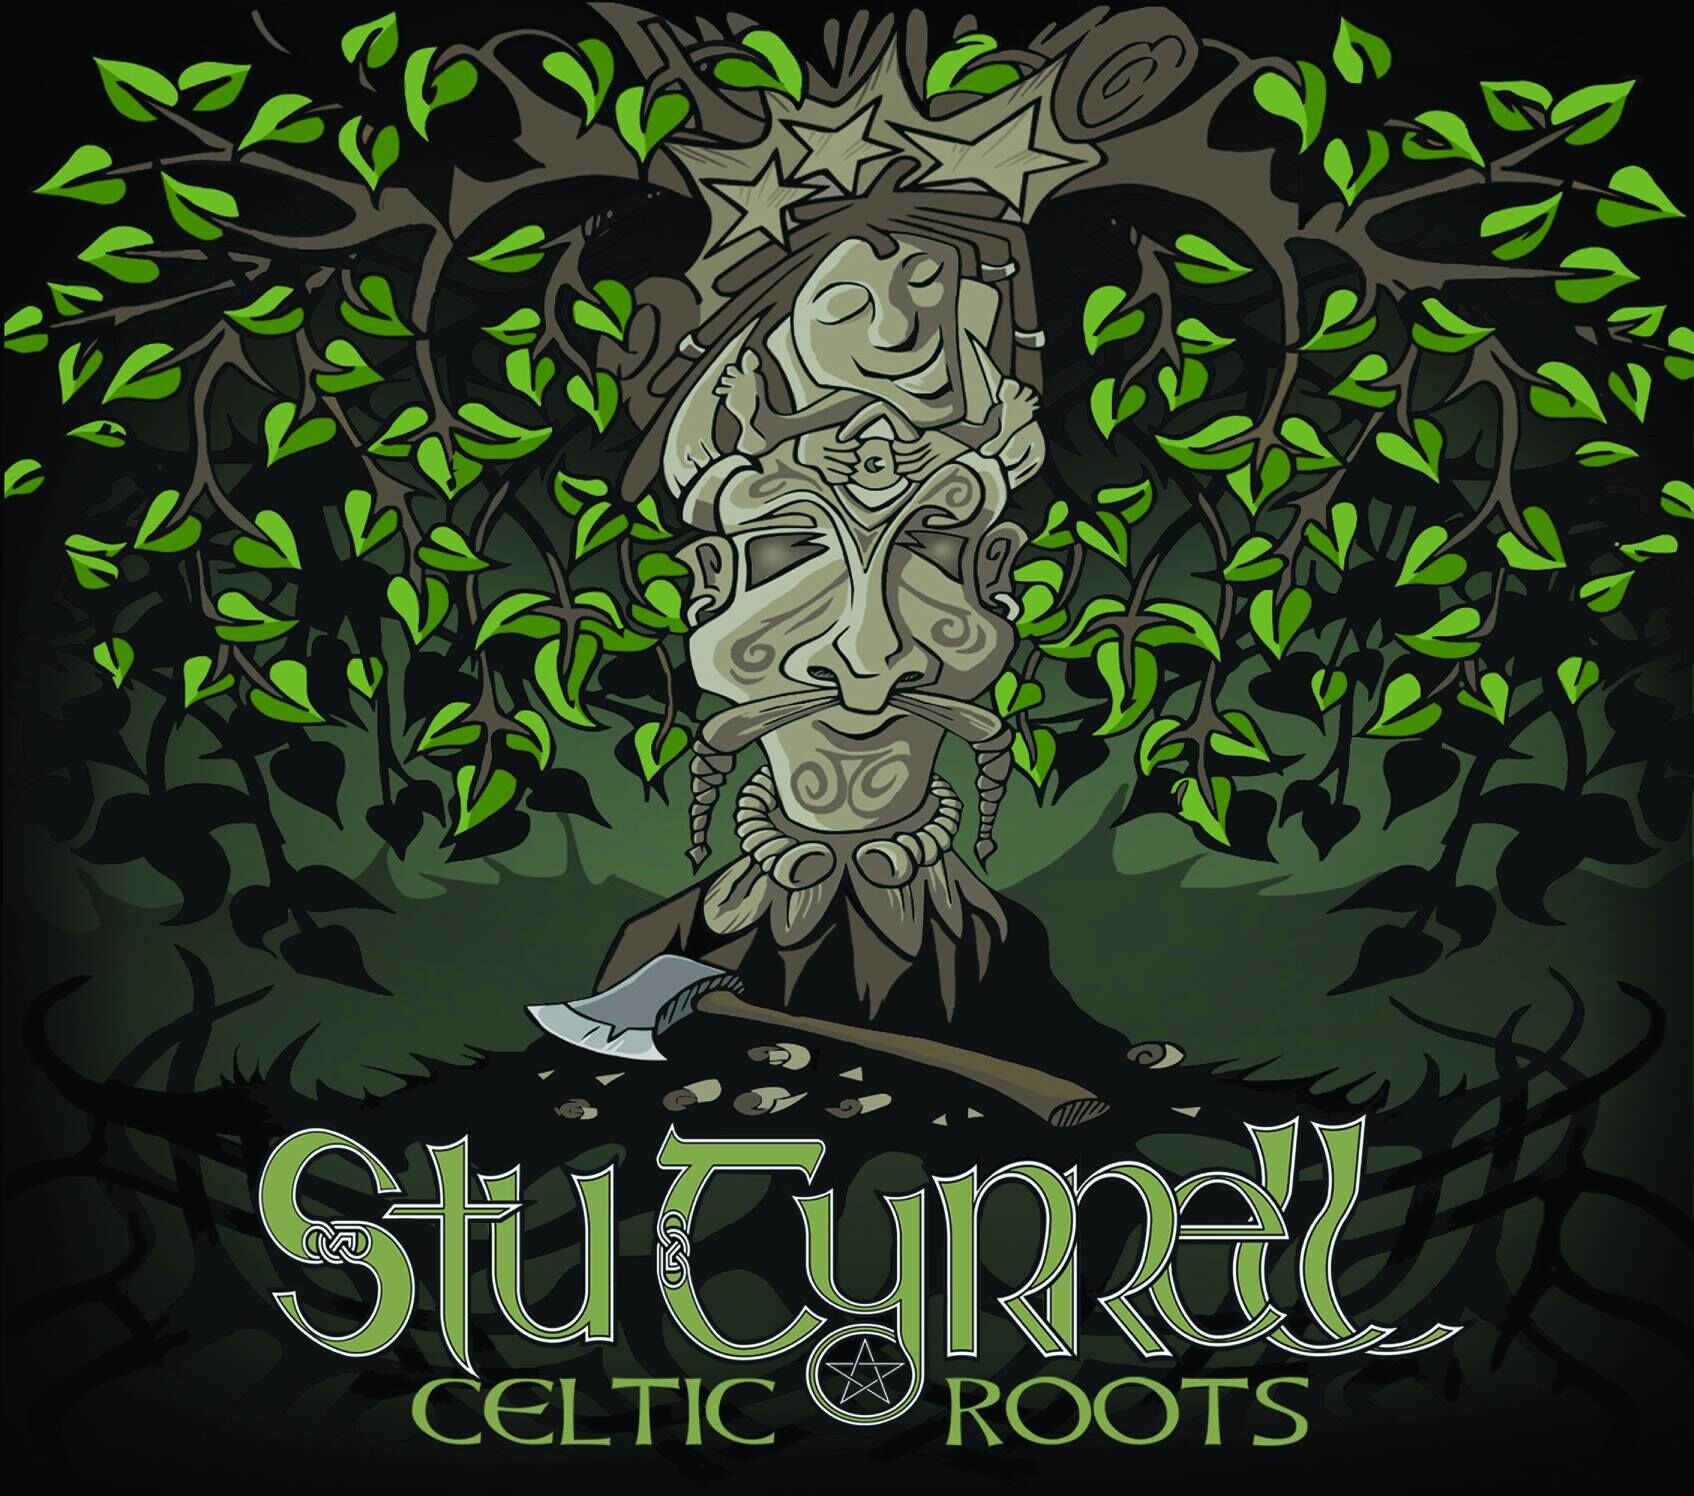 Stu Tyrrell Set To Release Debut EP ‘Celtic Roots’